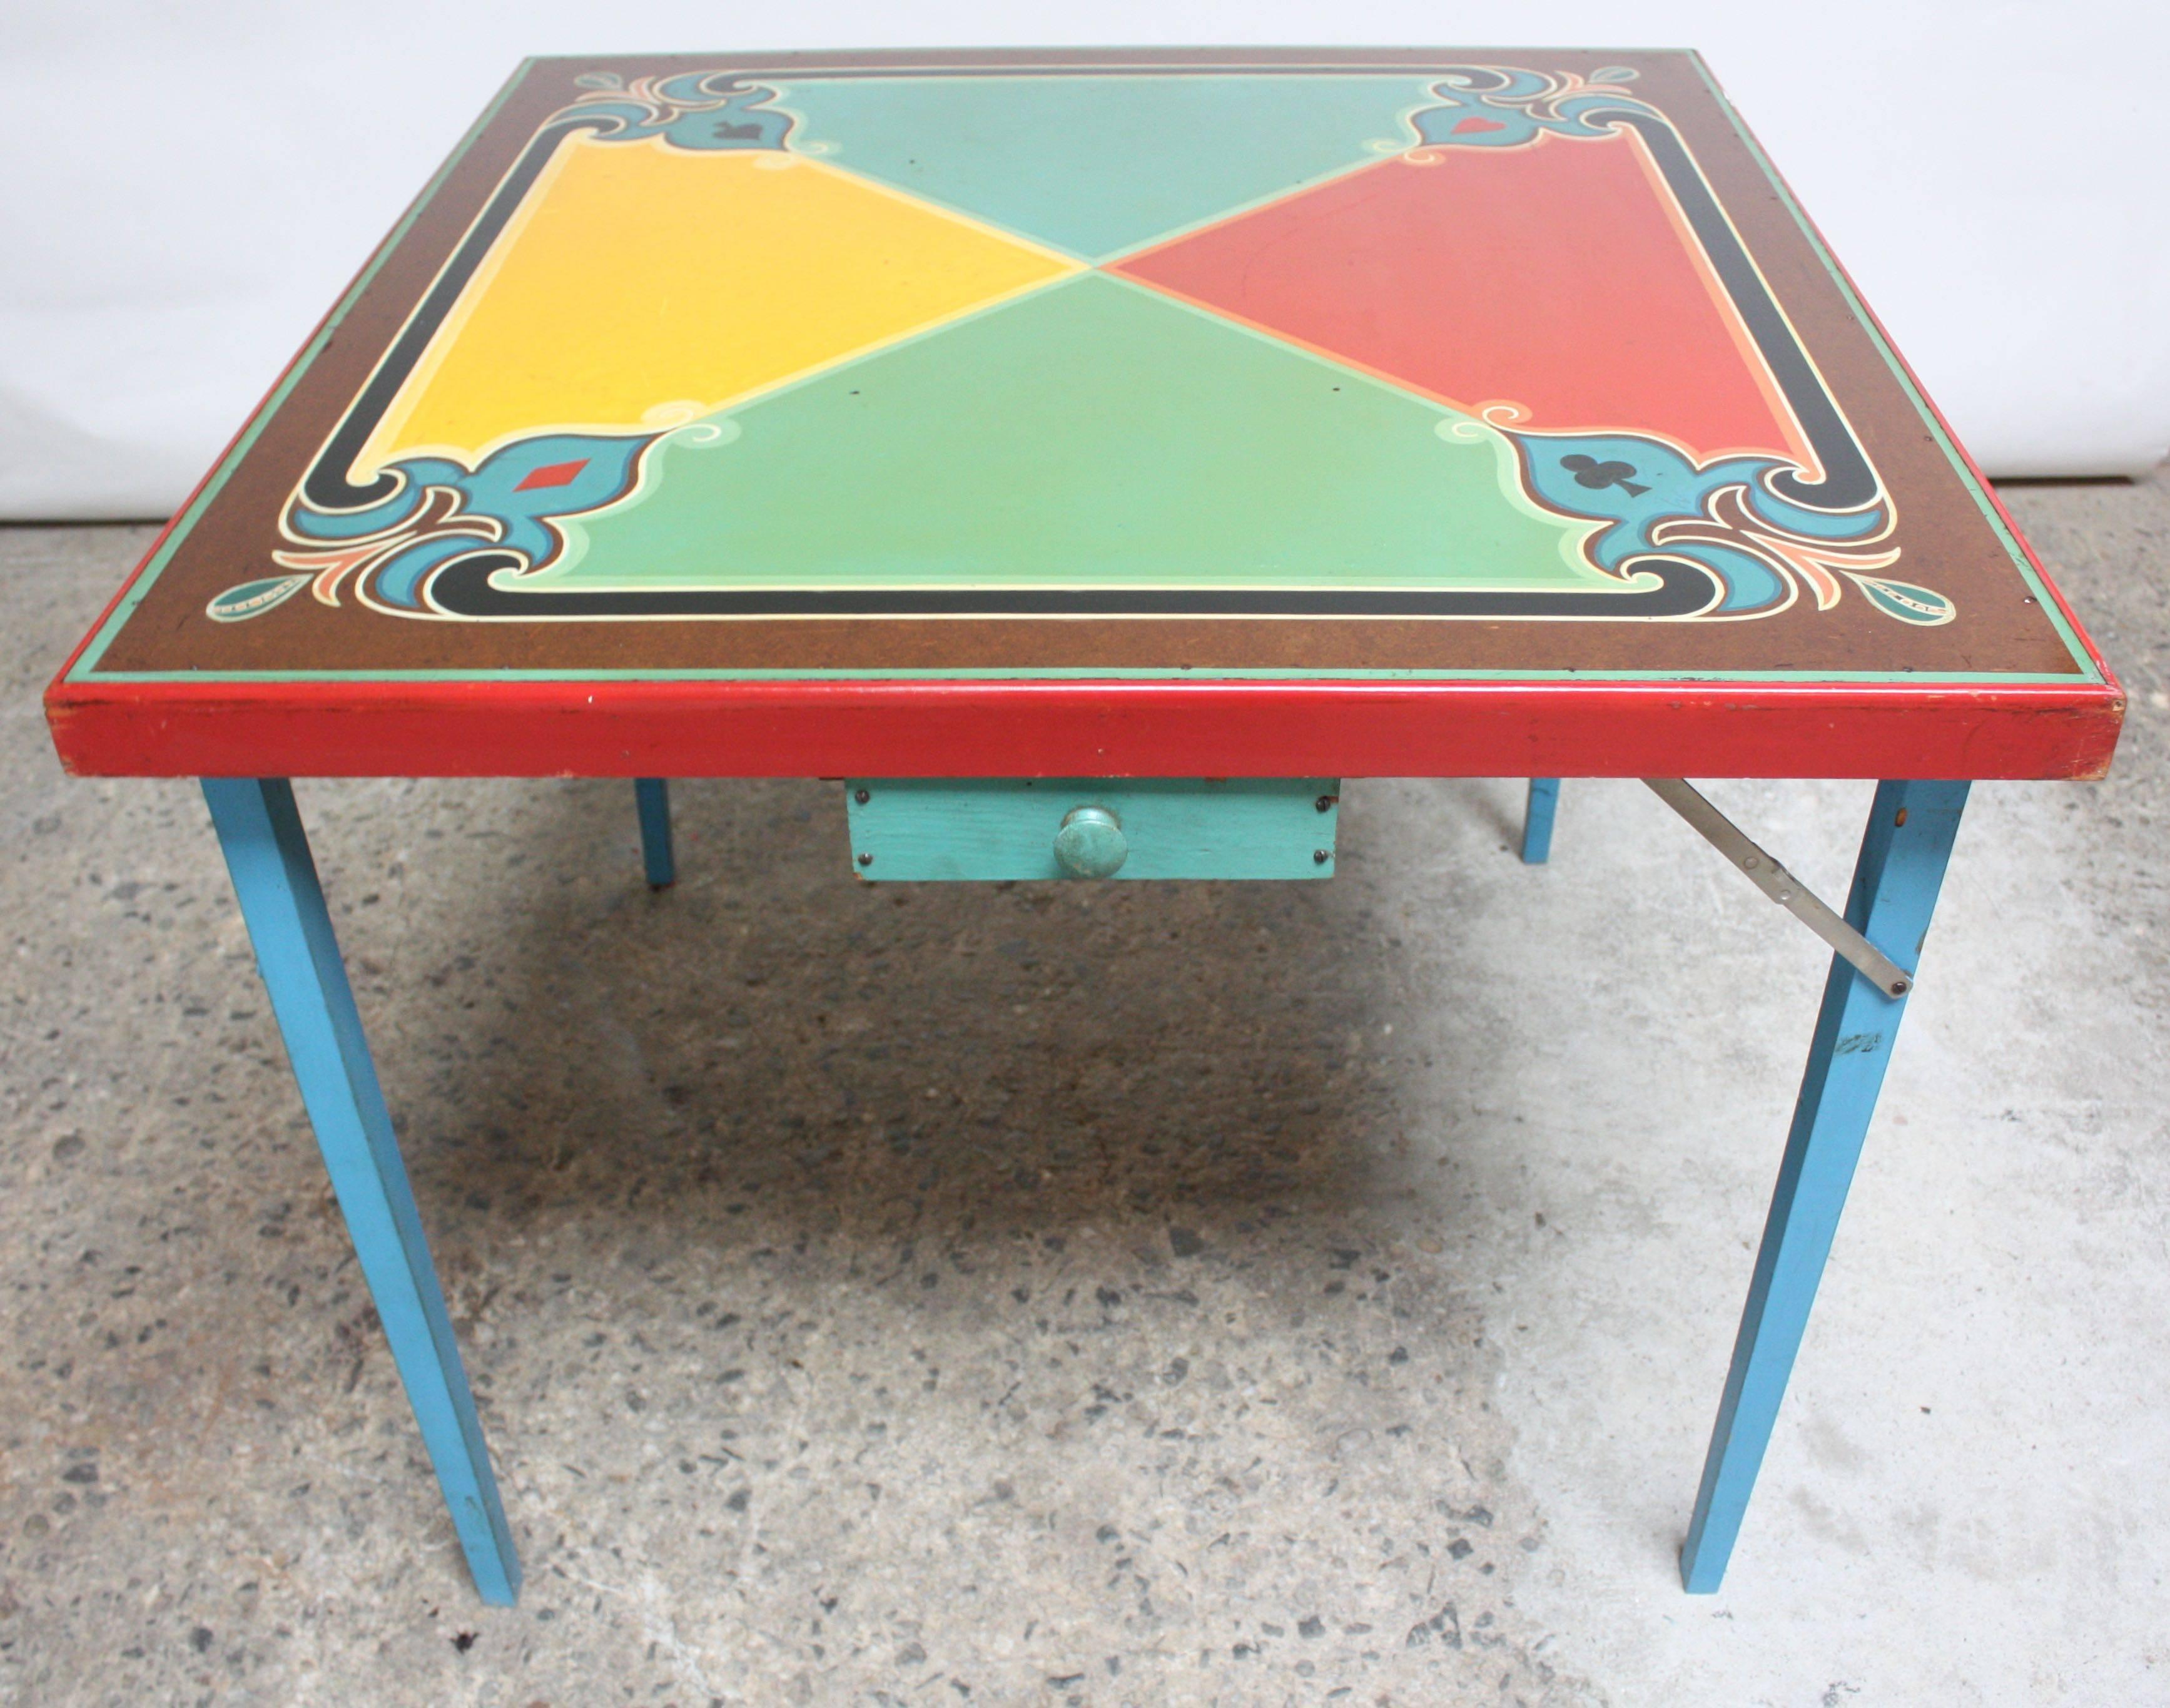 Charming, hand-painted card table displaying all four card suits with a small double sided drawer. Legs are collapsible for easy storage.
Retains all original paint shows wear from use including spotting and loss in places. Nice patina and age.